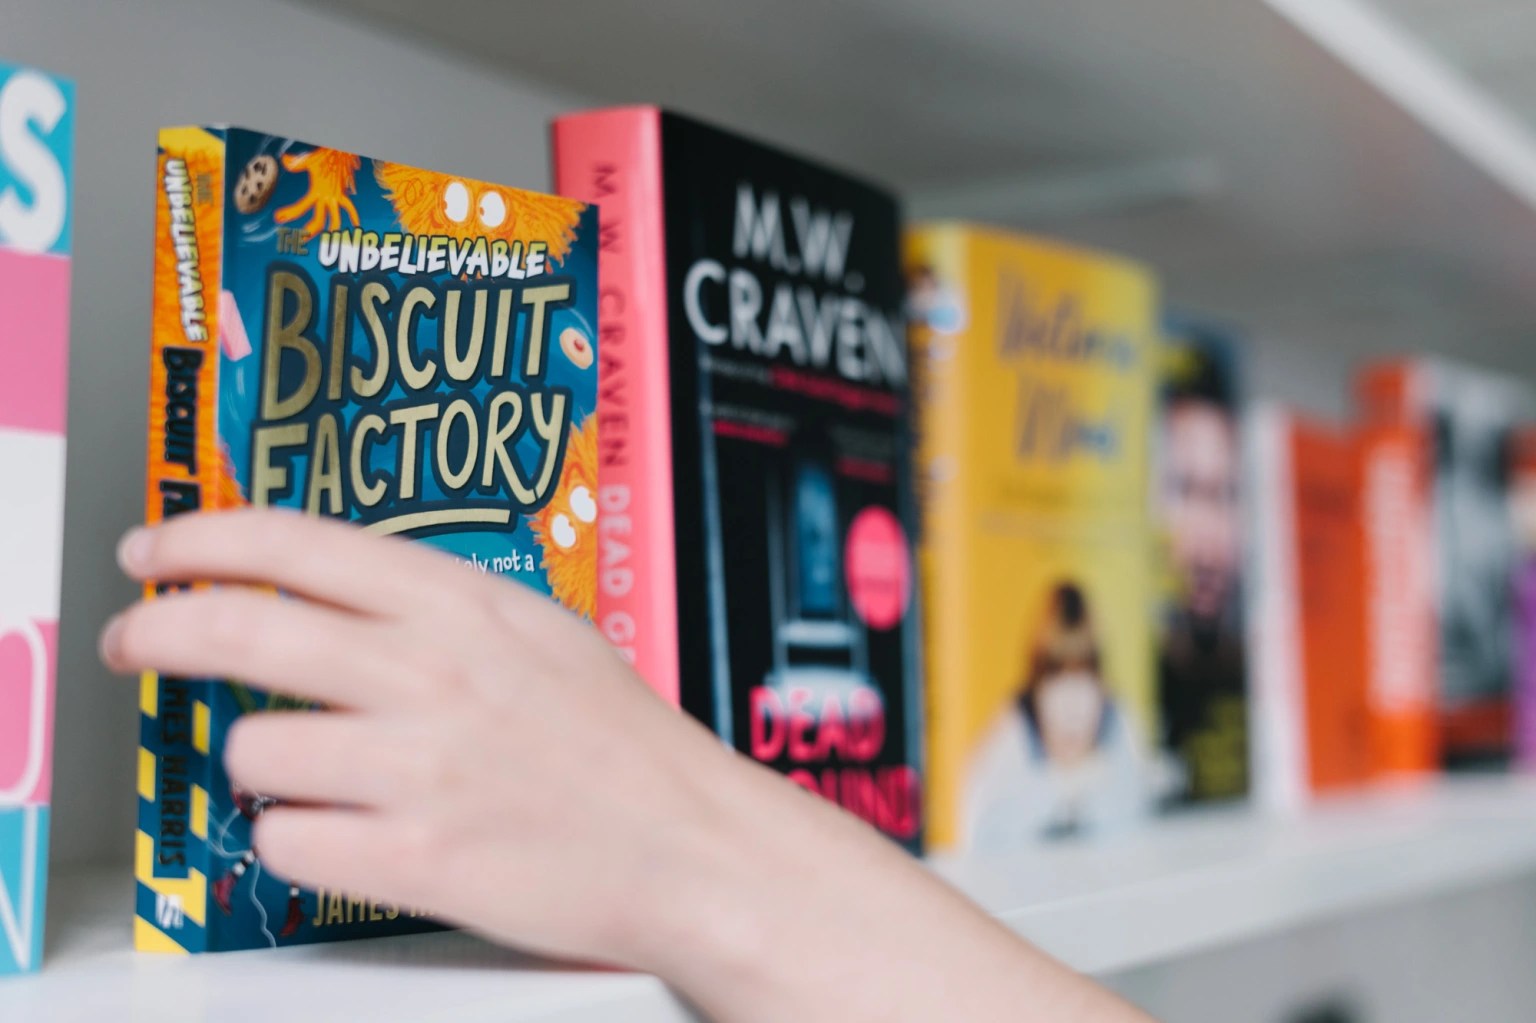 Biscuit Factory book being taken from a shelf.